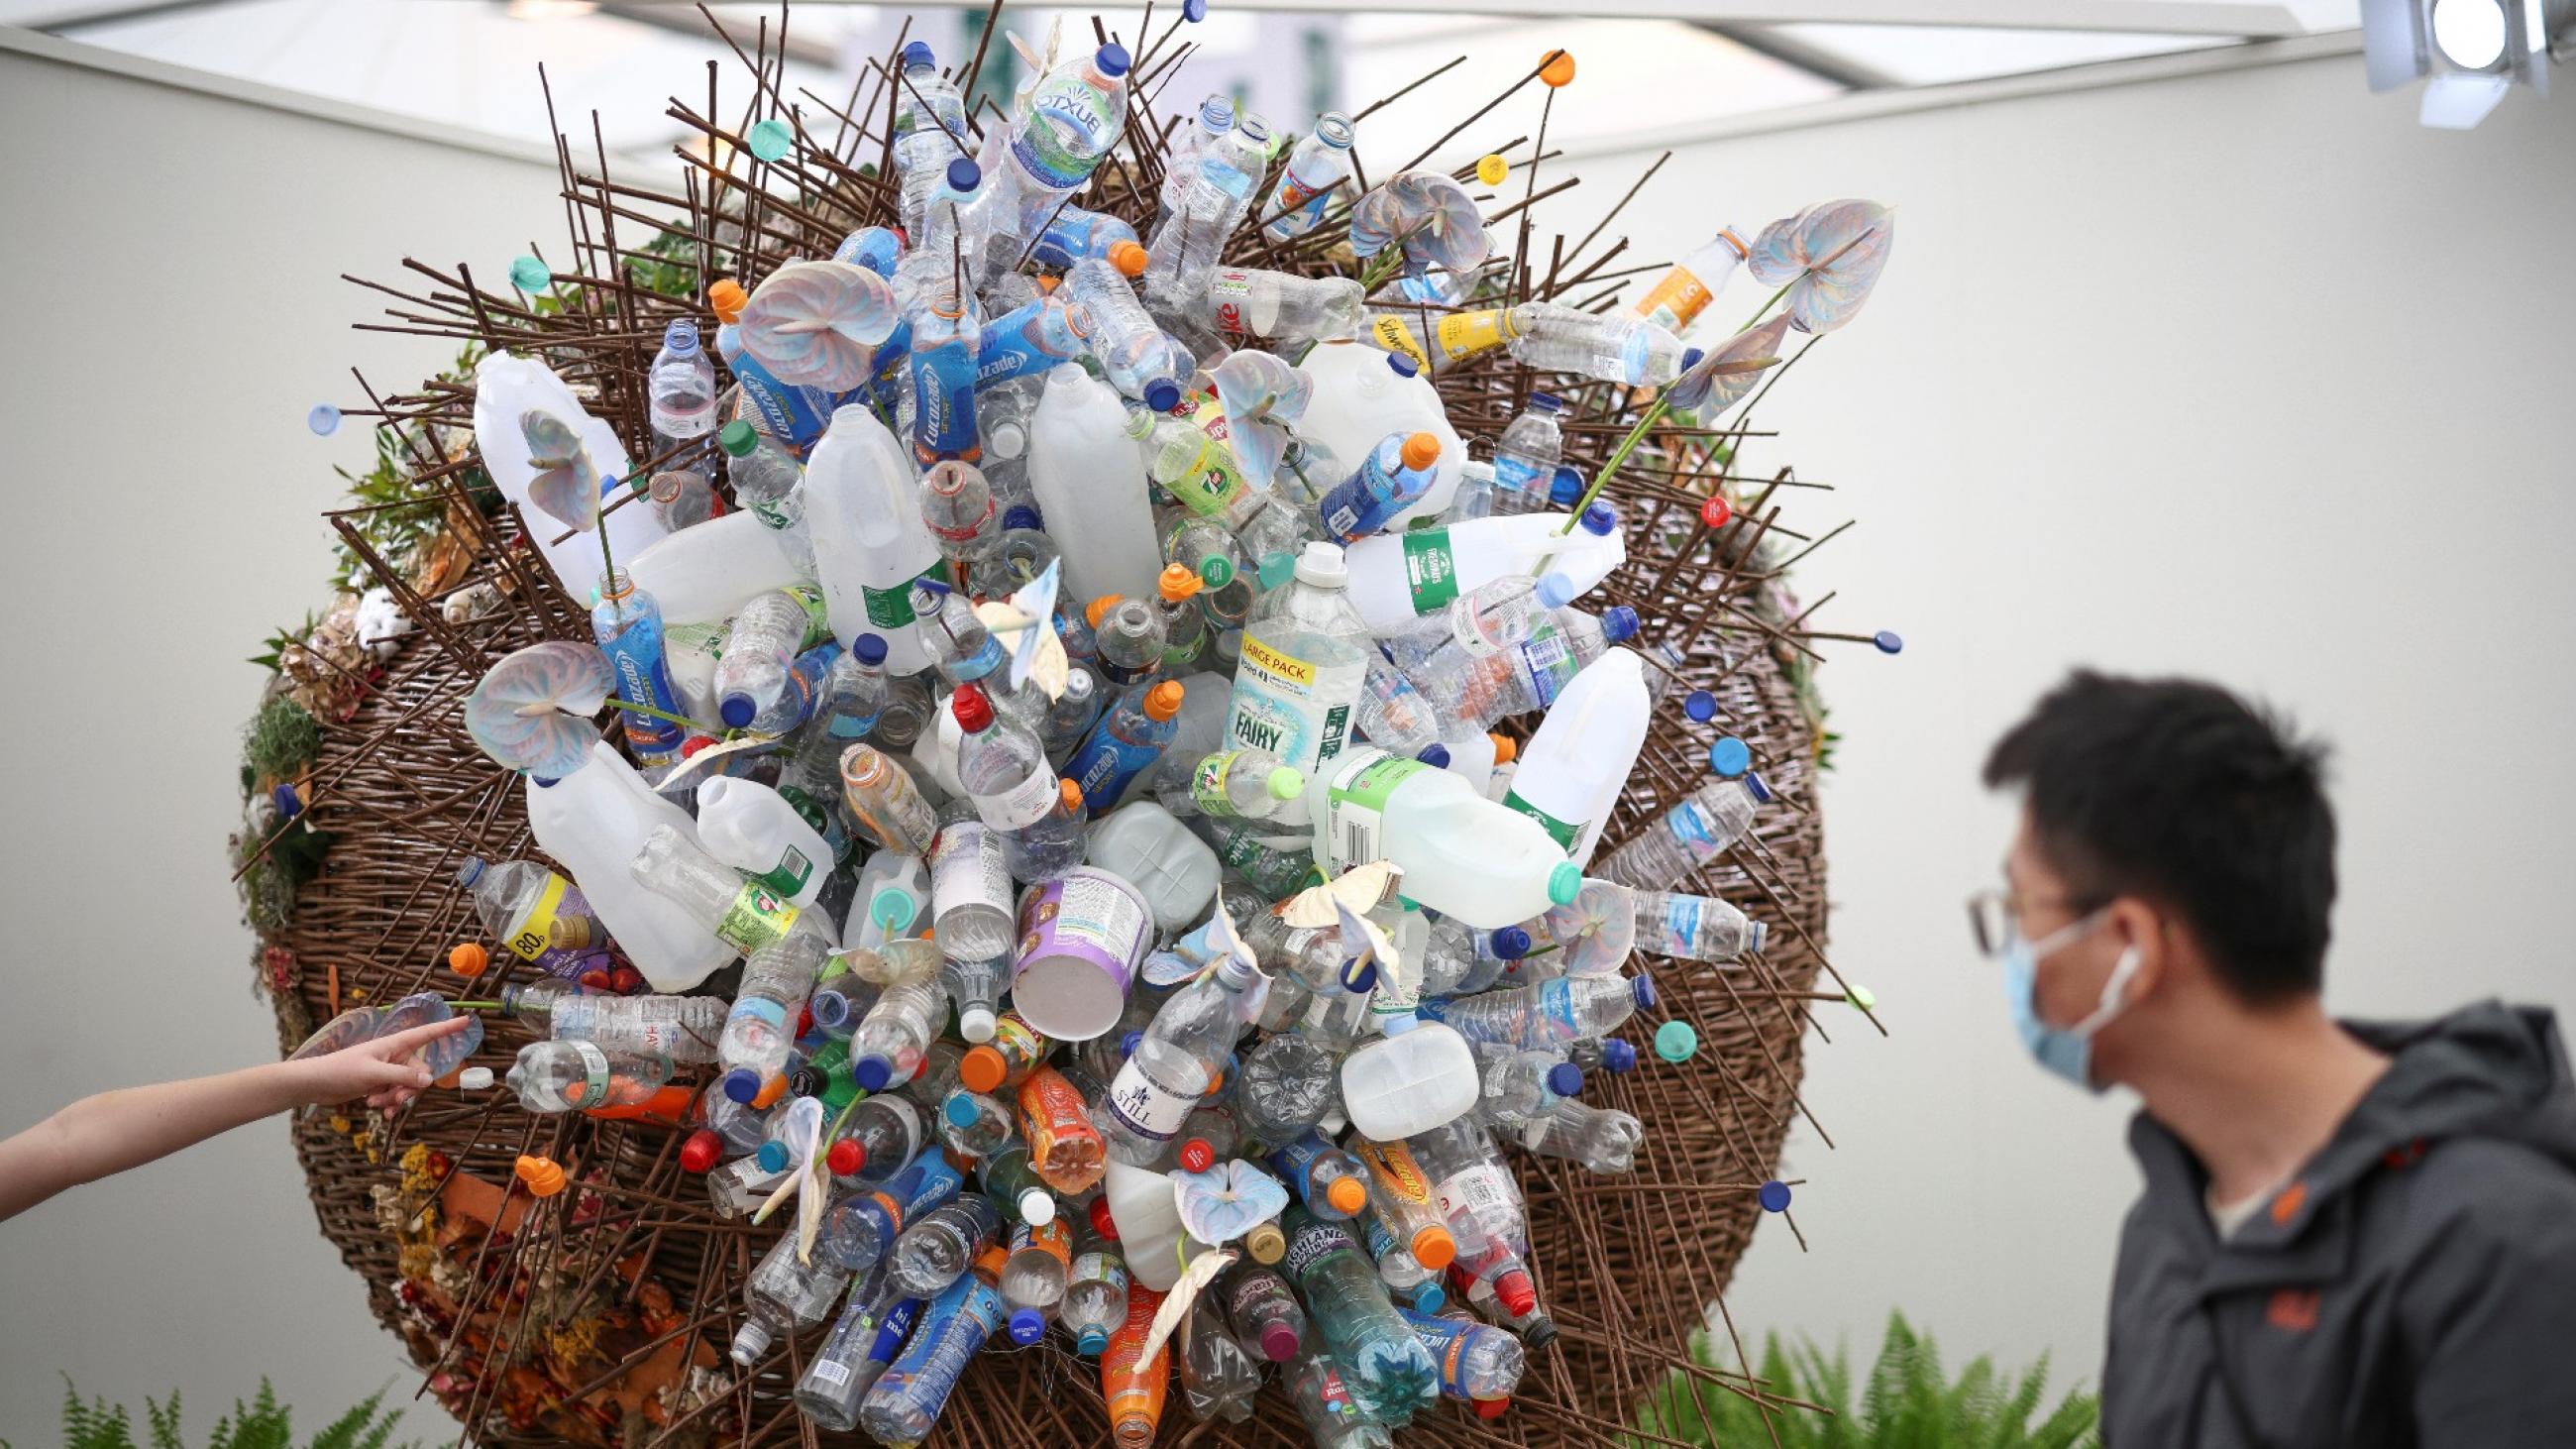 A man with black hair wearing a blue surgical face mask looks at a sculpture made out of plastic bottles at he Chelsea Flower Show, in London, England